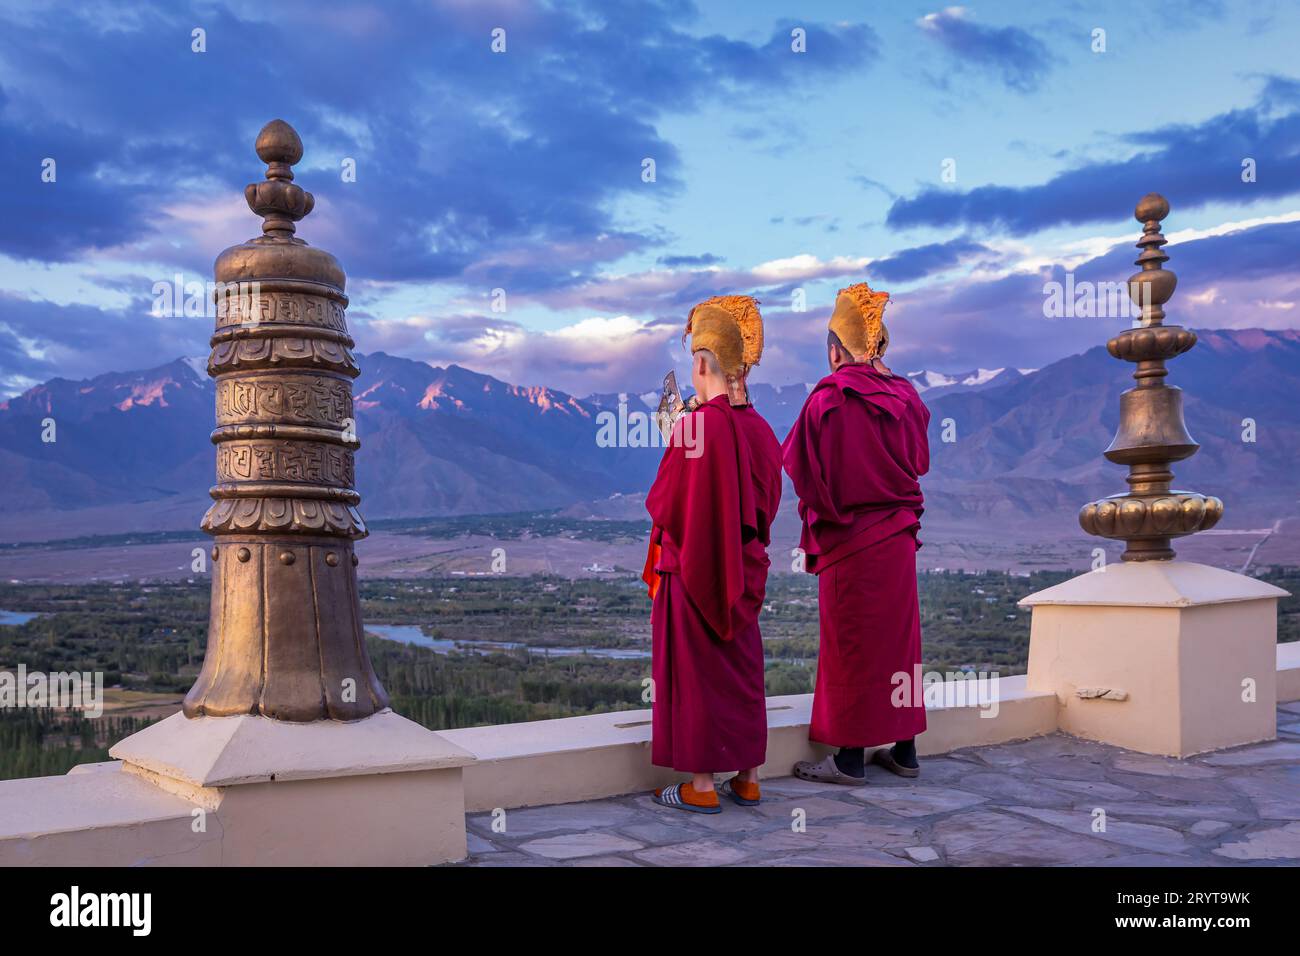 Buddhist monks blowing conch shells at Thikse Monastery (Thiksay Gompa), Ladakh, India Stock Photo